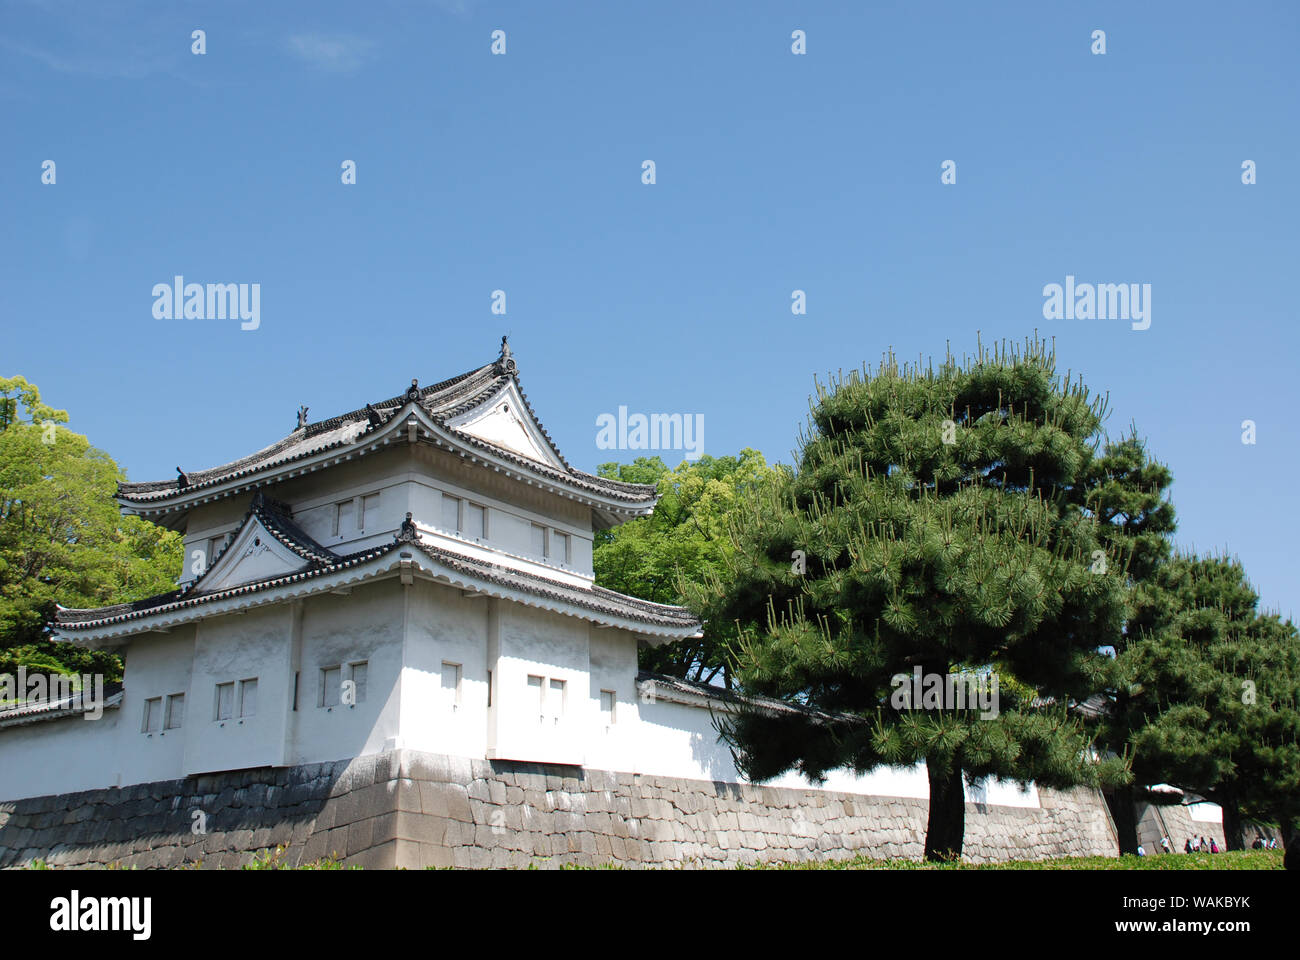 The UNESCO World Heritage Site listed Nijo Castle in Kyoto, Japan Stock Photo